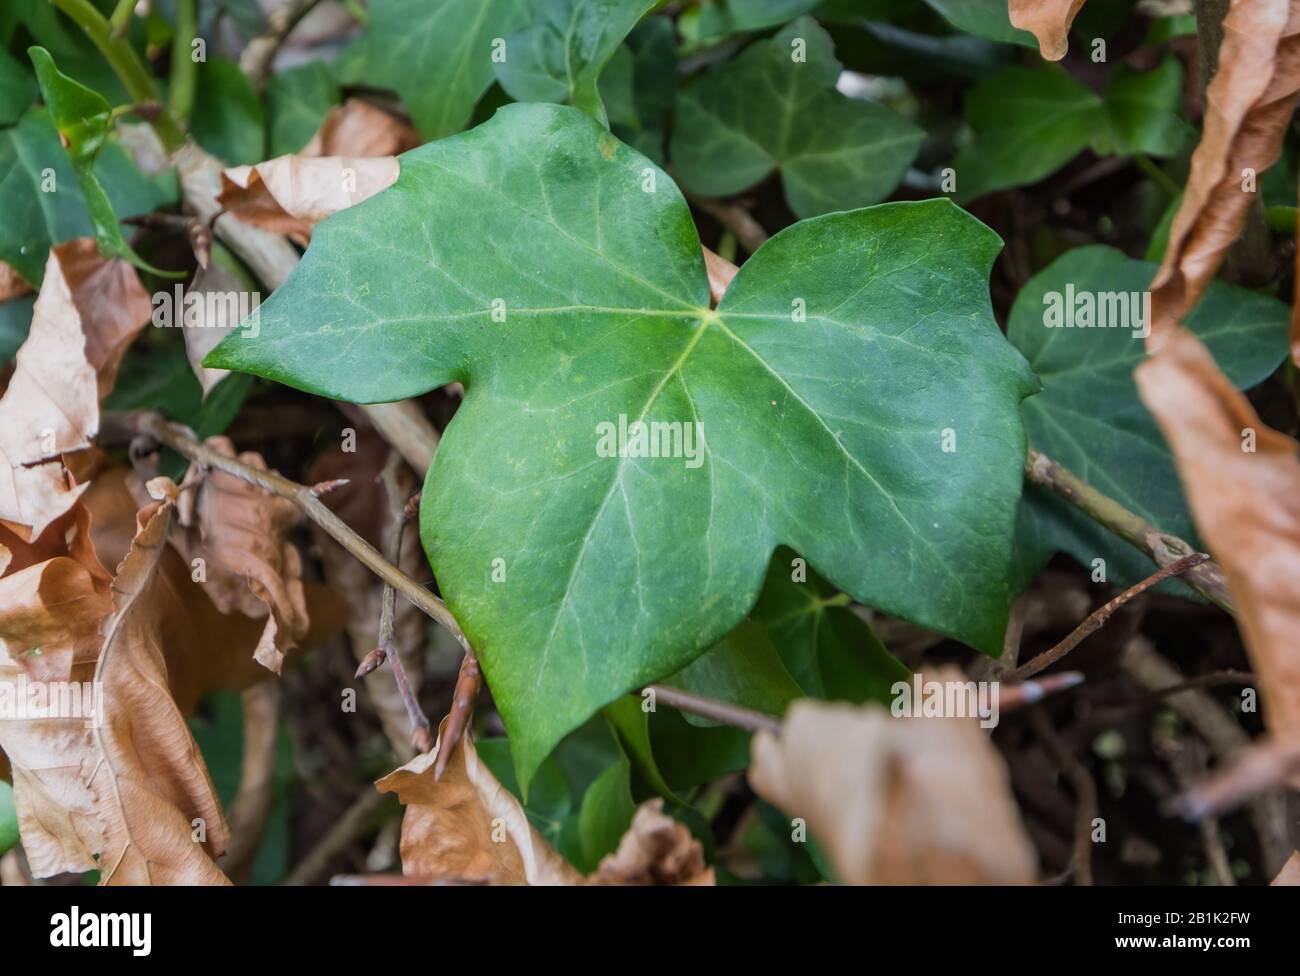 Dark green evergreen palmately lobed leaf from English Ivy (Common Ivy, Hedera helix). Leaves with 3 lobes. Stock Photo